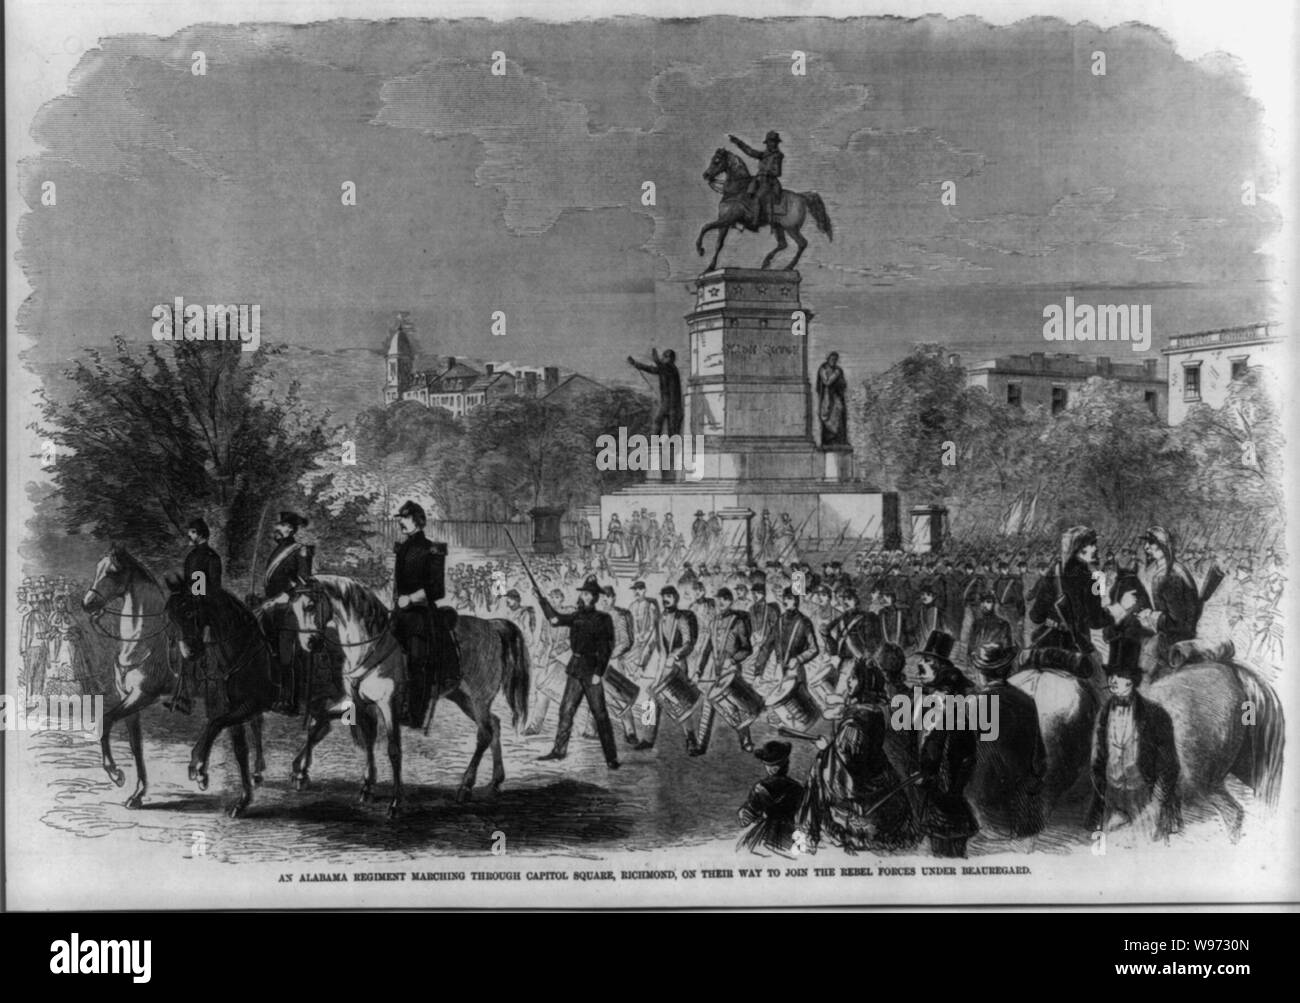 An Alabama regiment marching Capitol Square, Richmond, on their way to join the rebel forces under Beauregard Stock Photo